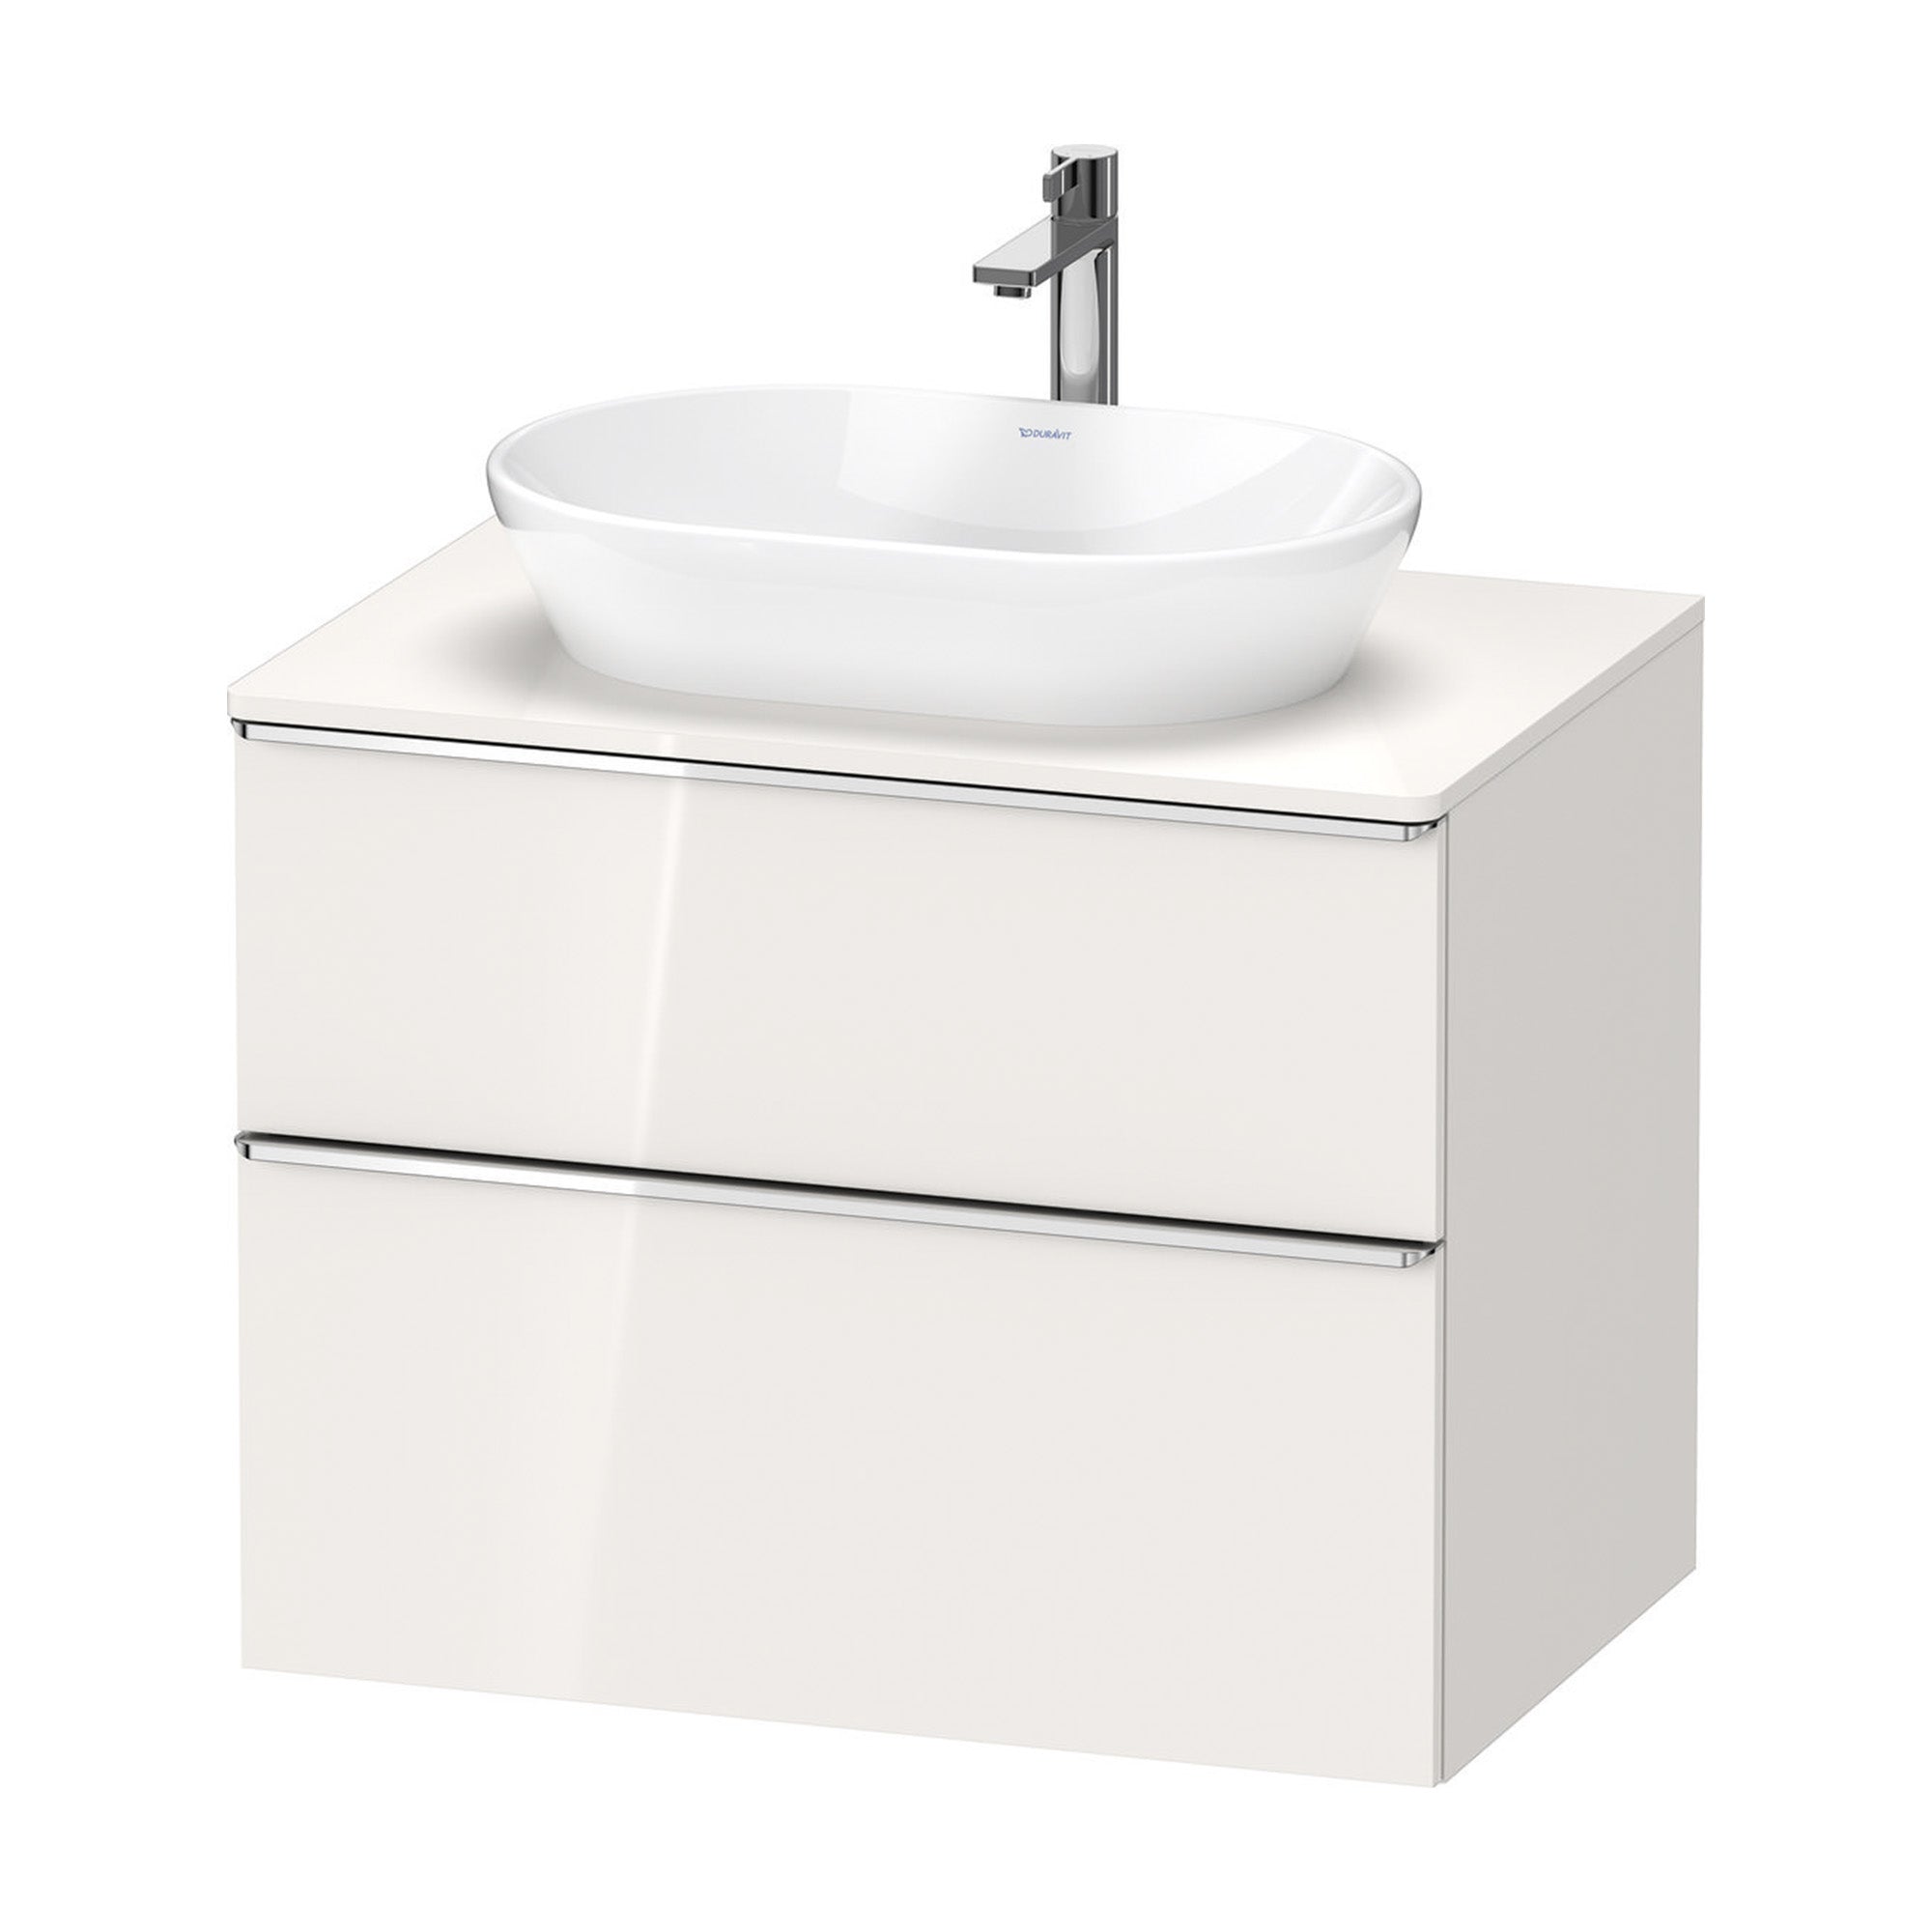 duravit d-neo 800 wall mounted vanity unit with worktop white gloss chrome handles